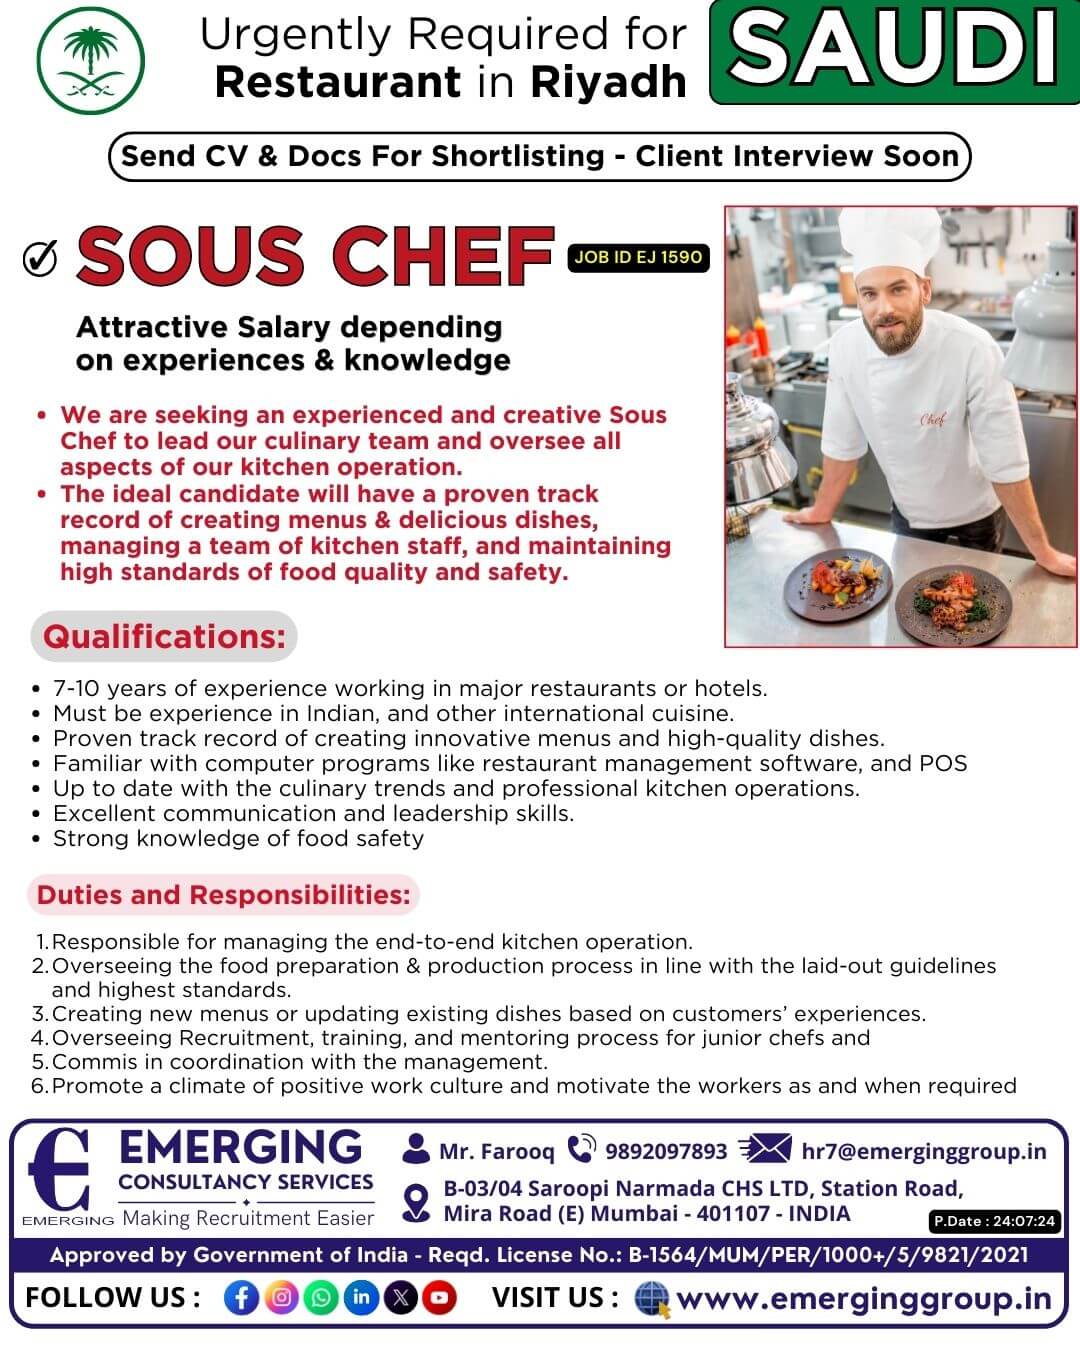 Urgently Required for Restaurant in Riyadh Saudi Arabia - Client Interview Soon